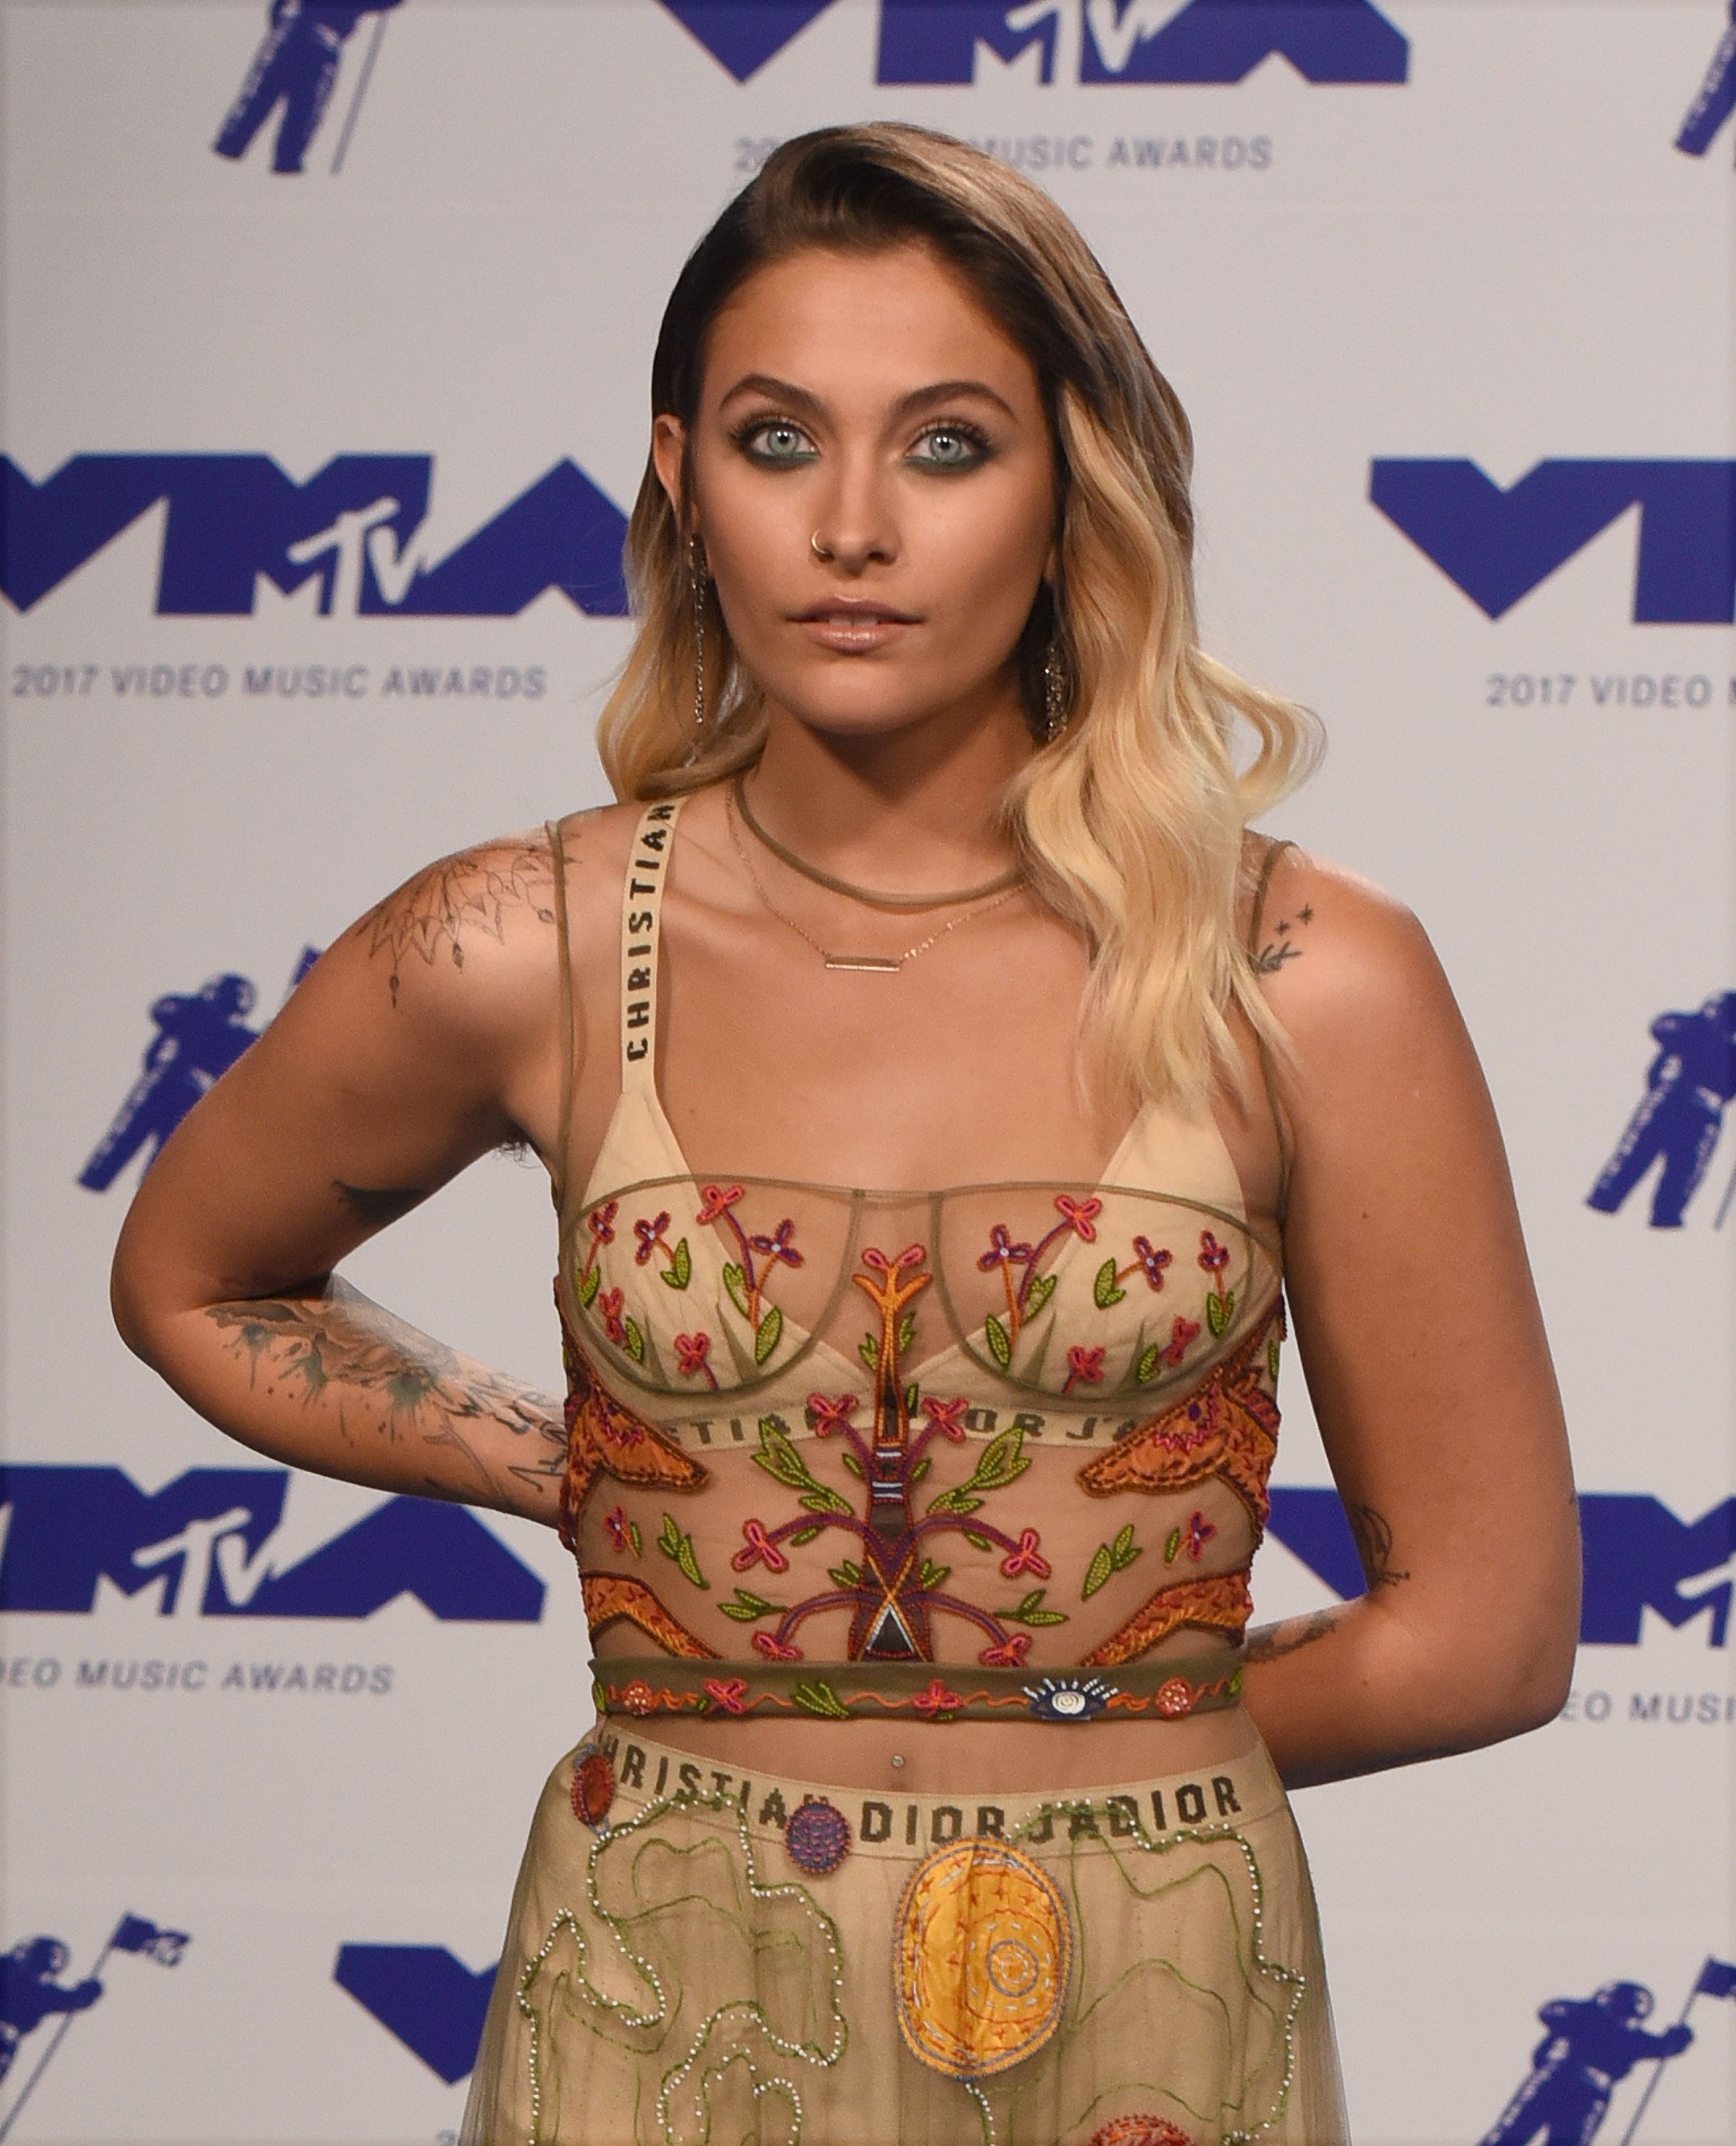 Paris Jackson attends the 2017 MTV Video Music Awards at The Forum on August 27, 2017 in Inglewood, California. | Photo: Getty Images